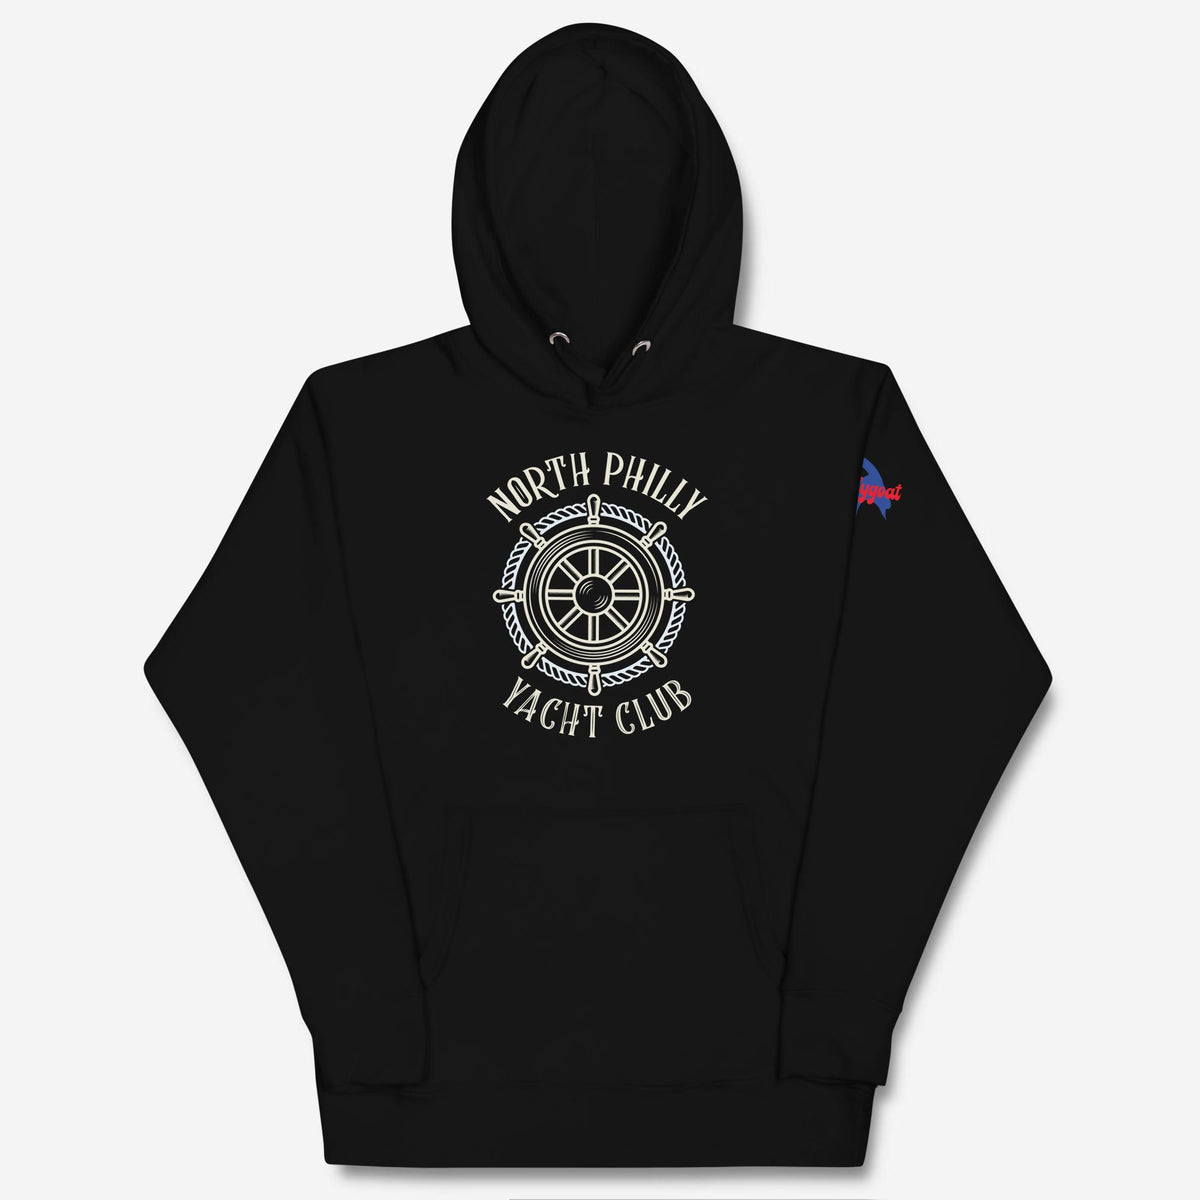 &quot;North Philly Yacht Club&quot; Hoodie